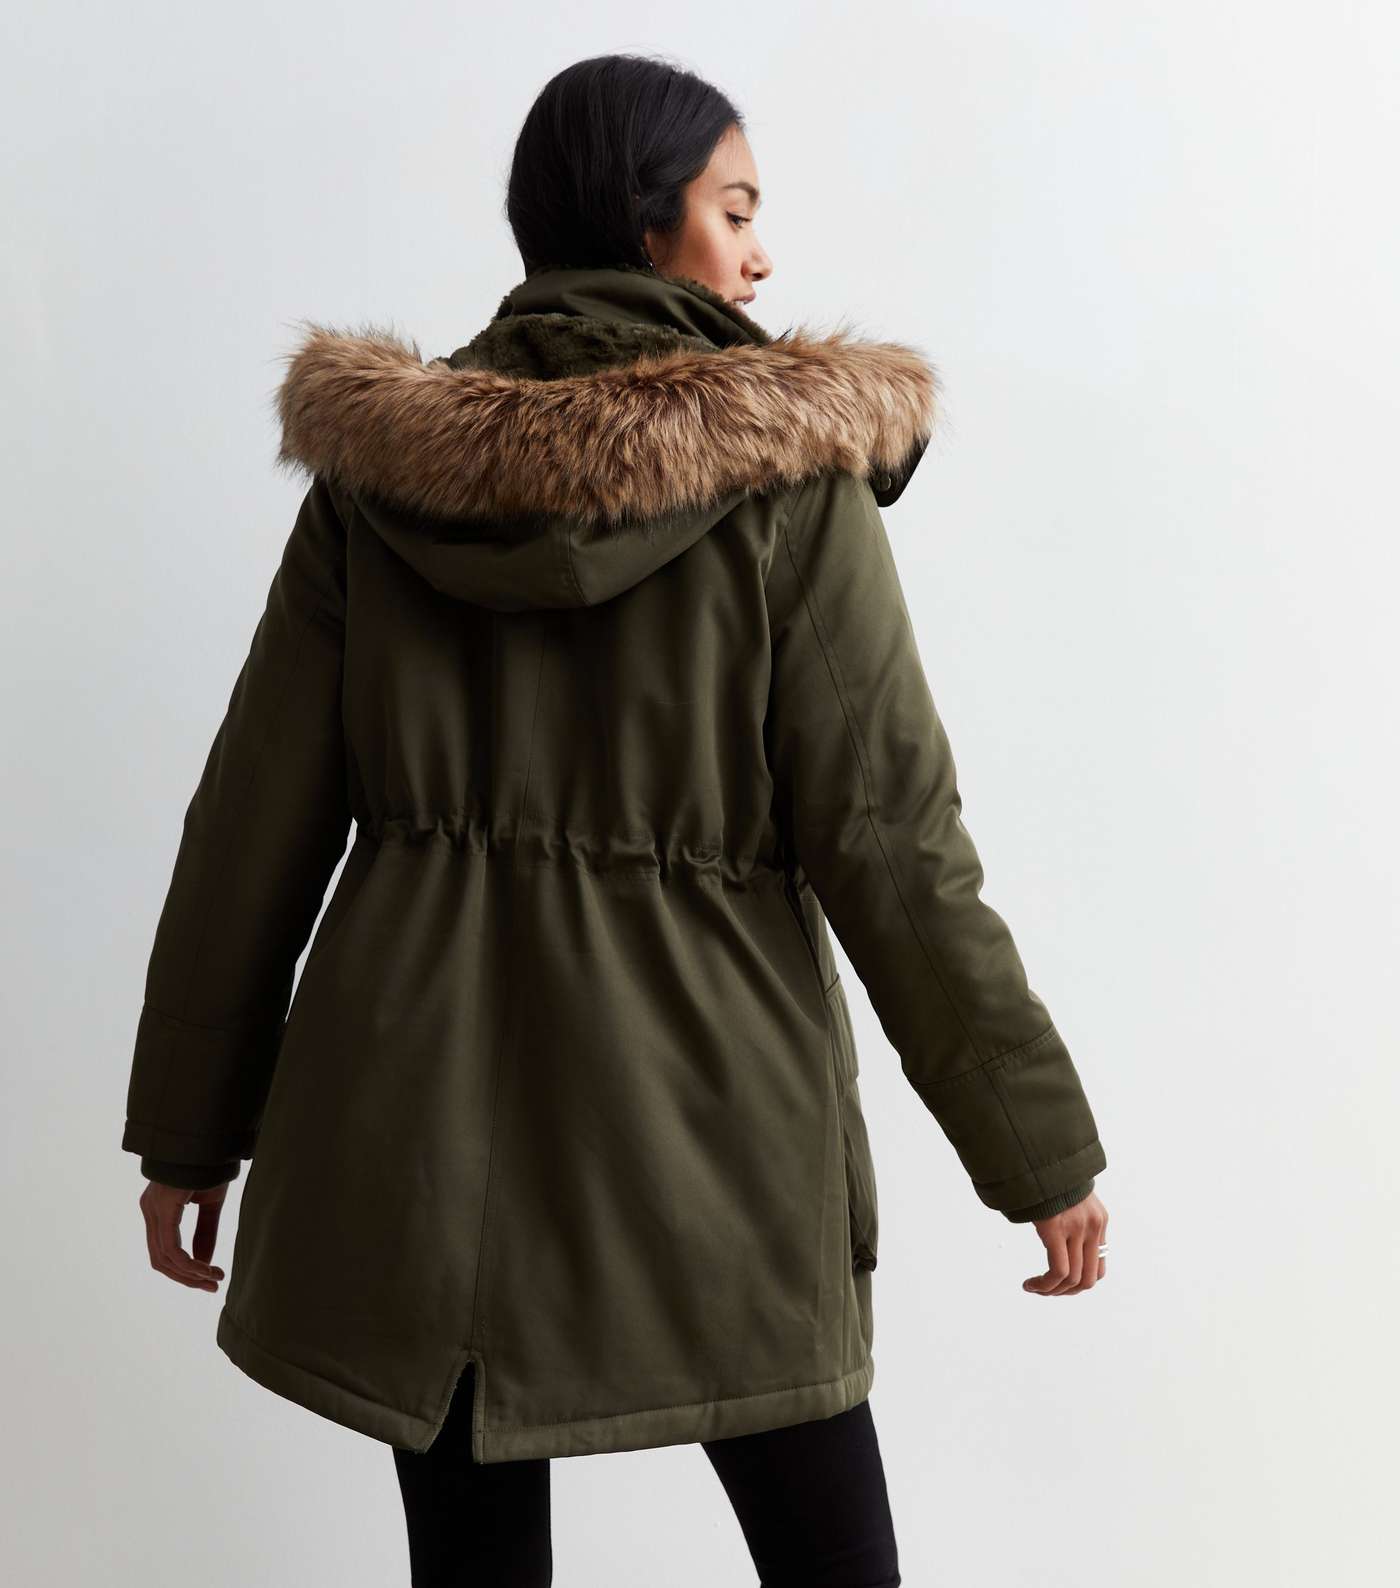 Hooded Parka with Faux Fur Lining for Girls - khaki, Girls